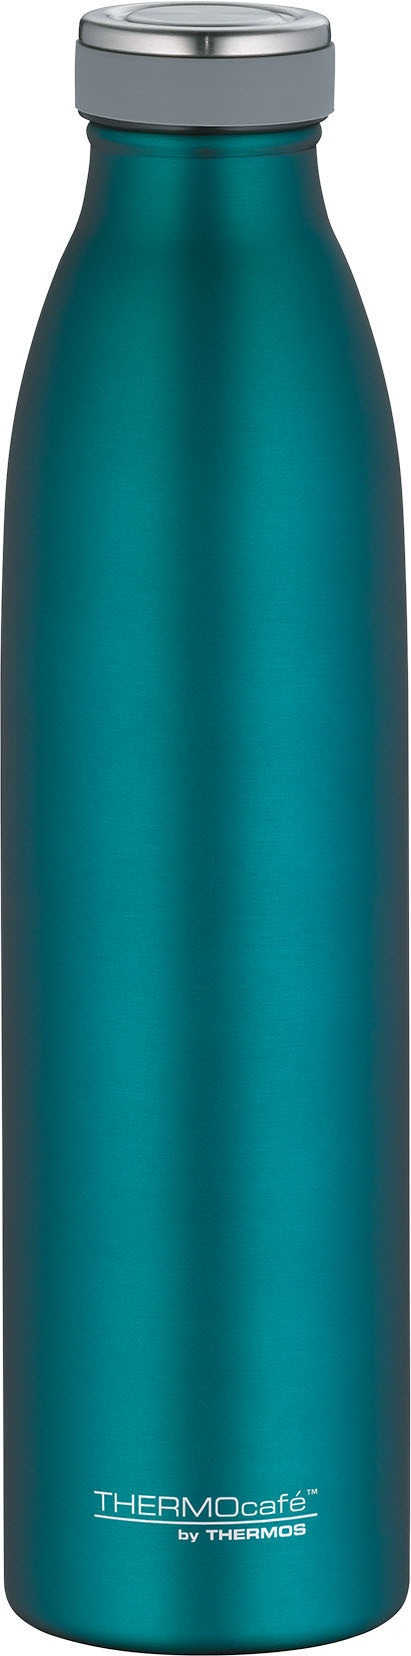 THERMOS Thermoflasche "Thermo Cafe"